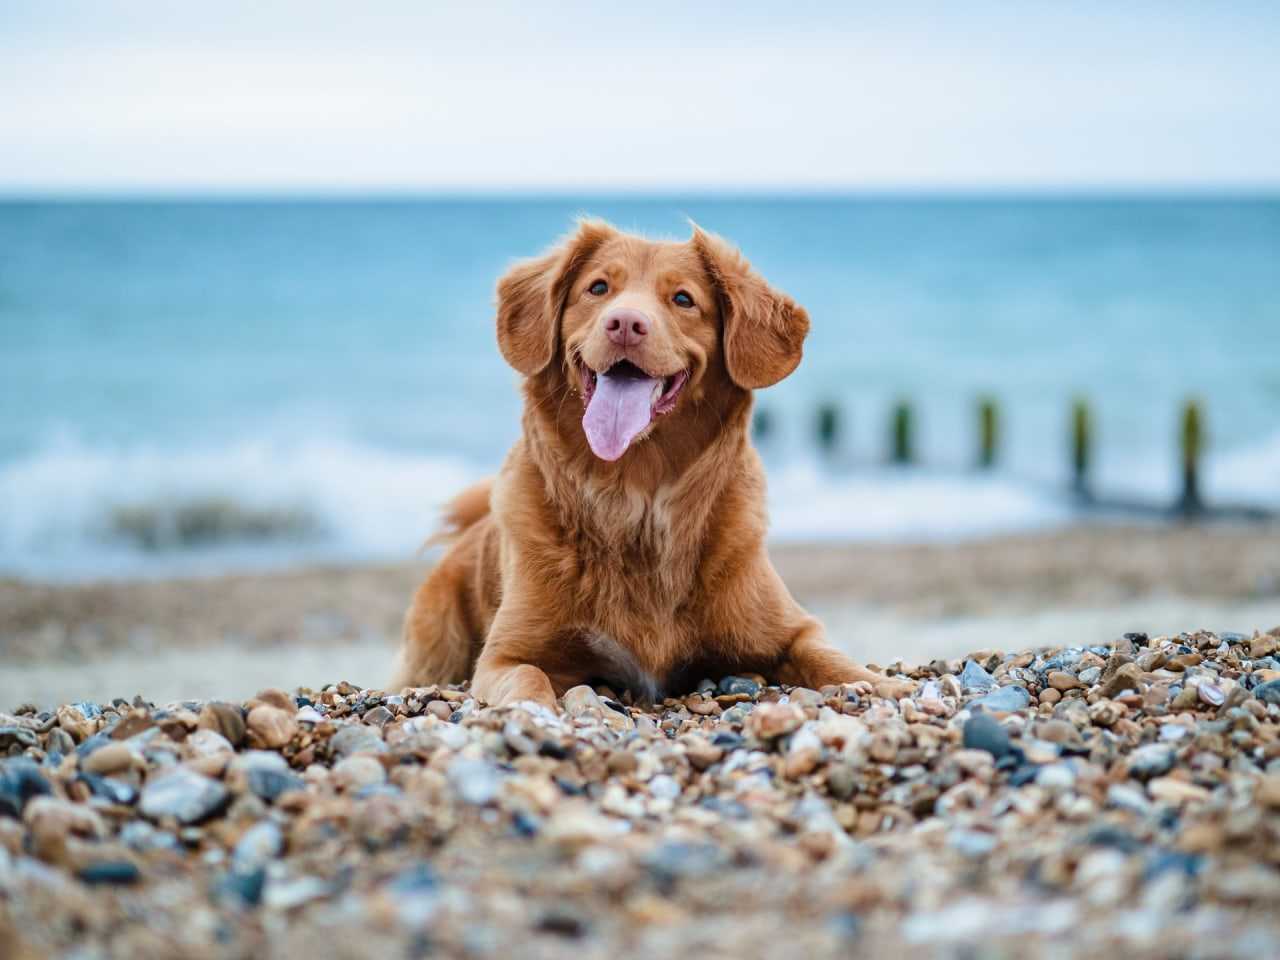 Finding dog-friendly beaches in Devon doesn't have to be a chore (Jamie Street / Unsplash)